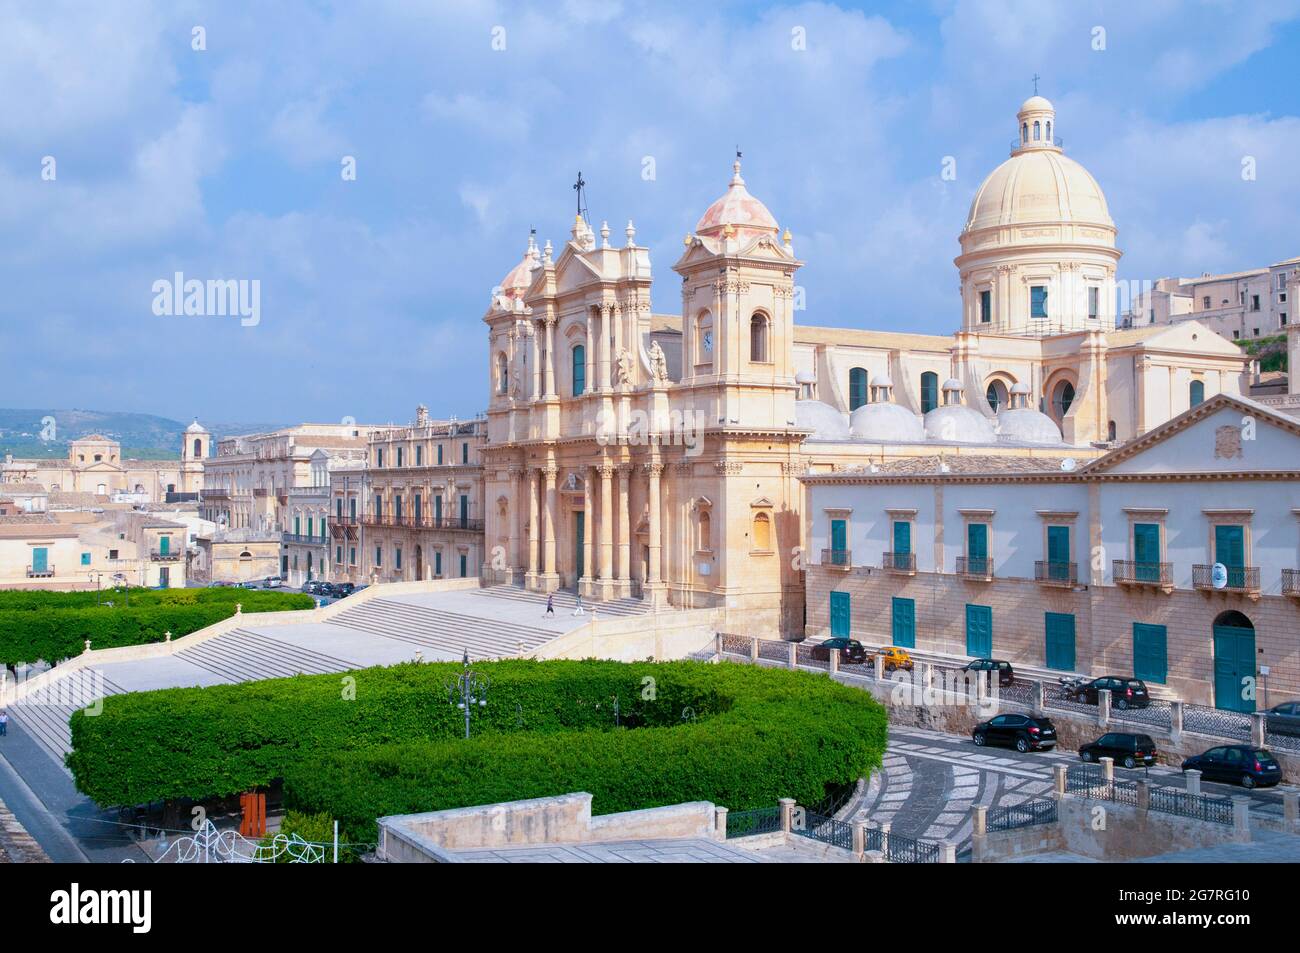 Noto, St Nicholas Cathedral of Noto, Sicily, Italy. Stock Photo